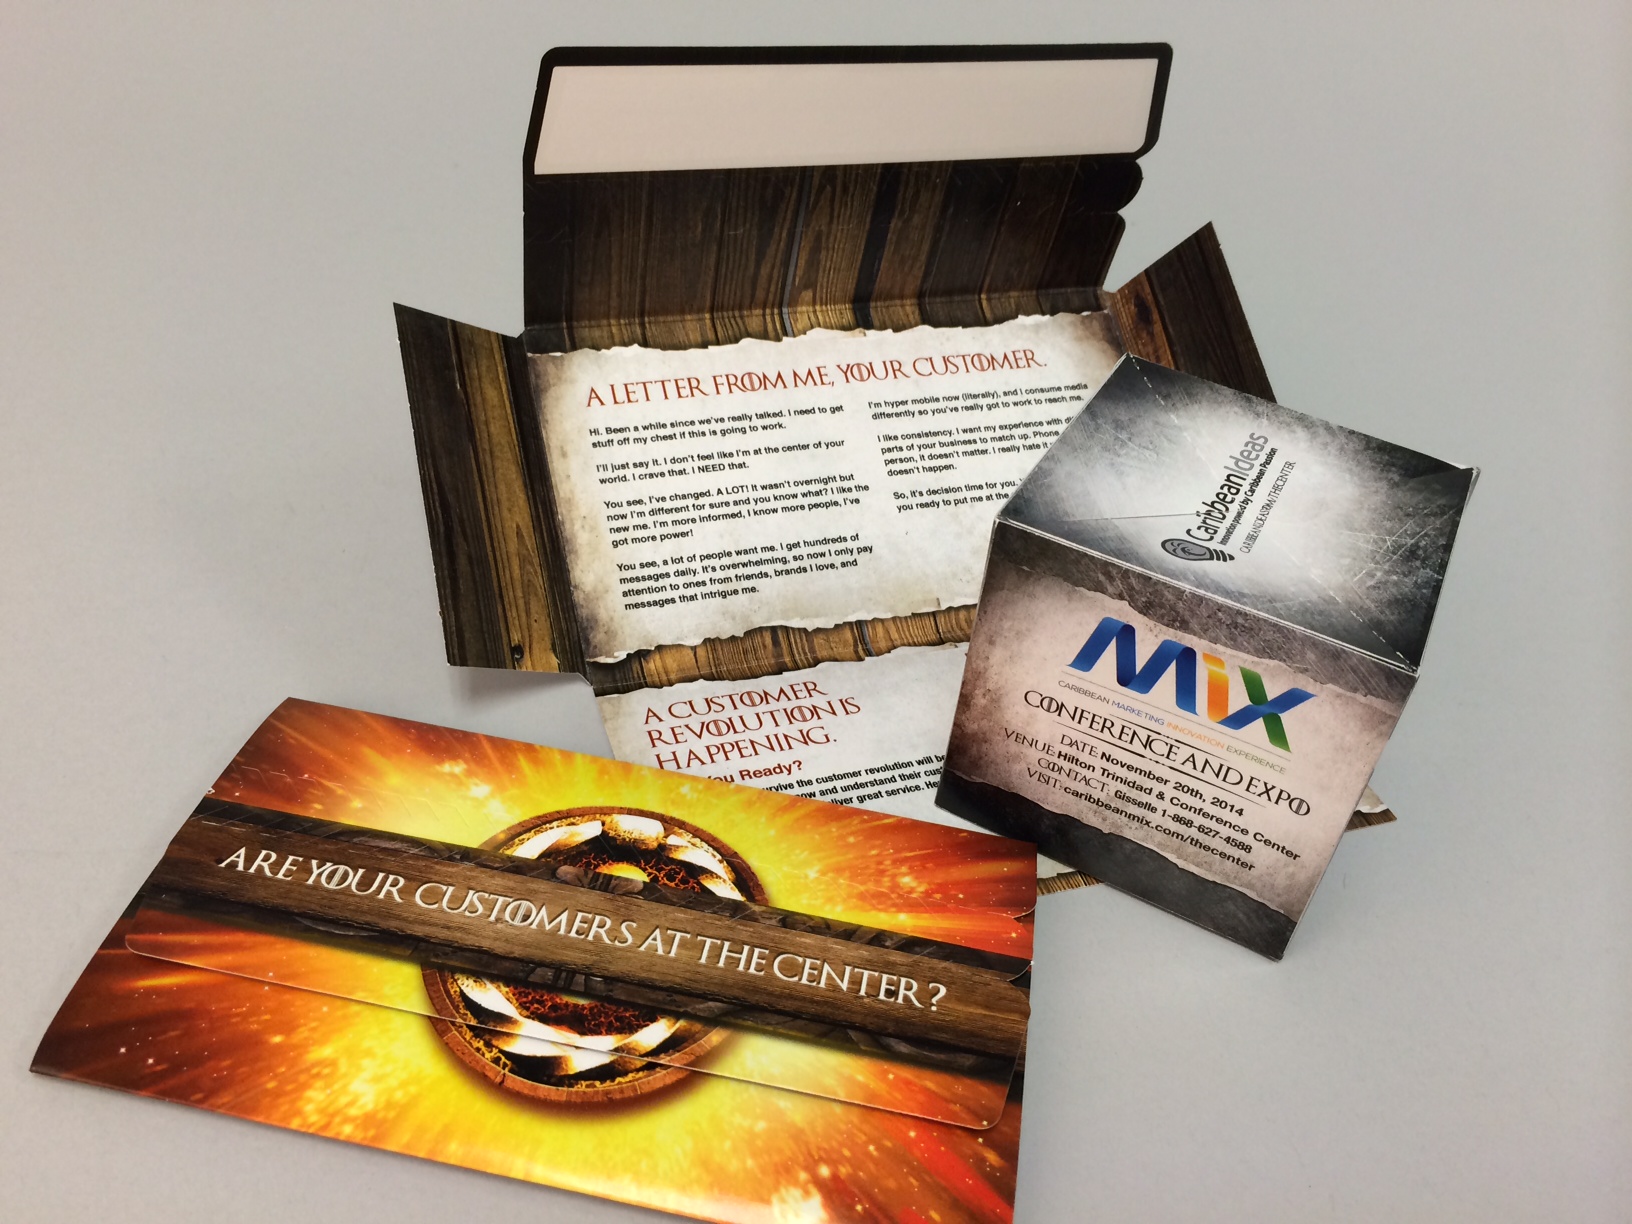 Caribbean Ideas Limited Uses 3" Pop Up Cube Self Mailer to Display Business Solutions